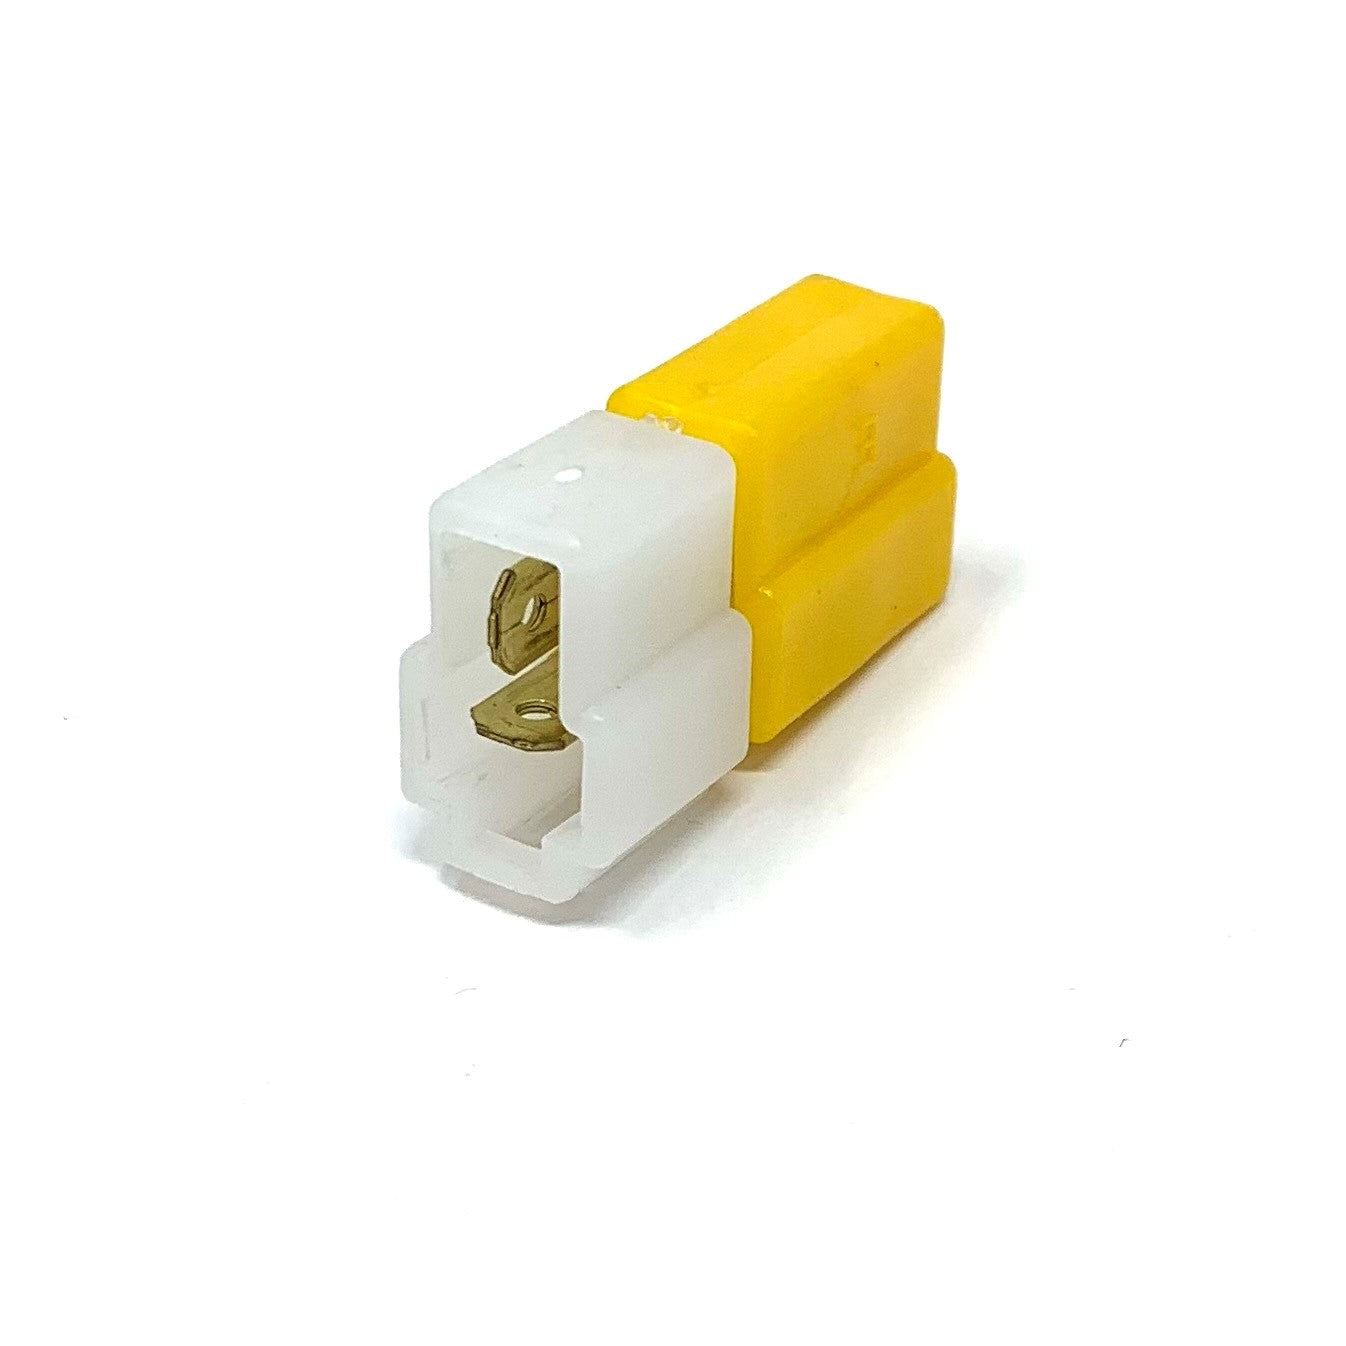 Takeuchi Diode (3A Yellow) - Part Number: 17000-00008